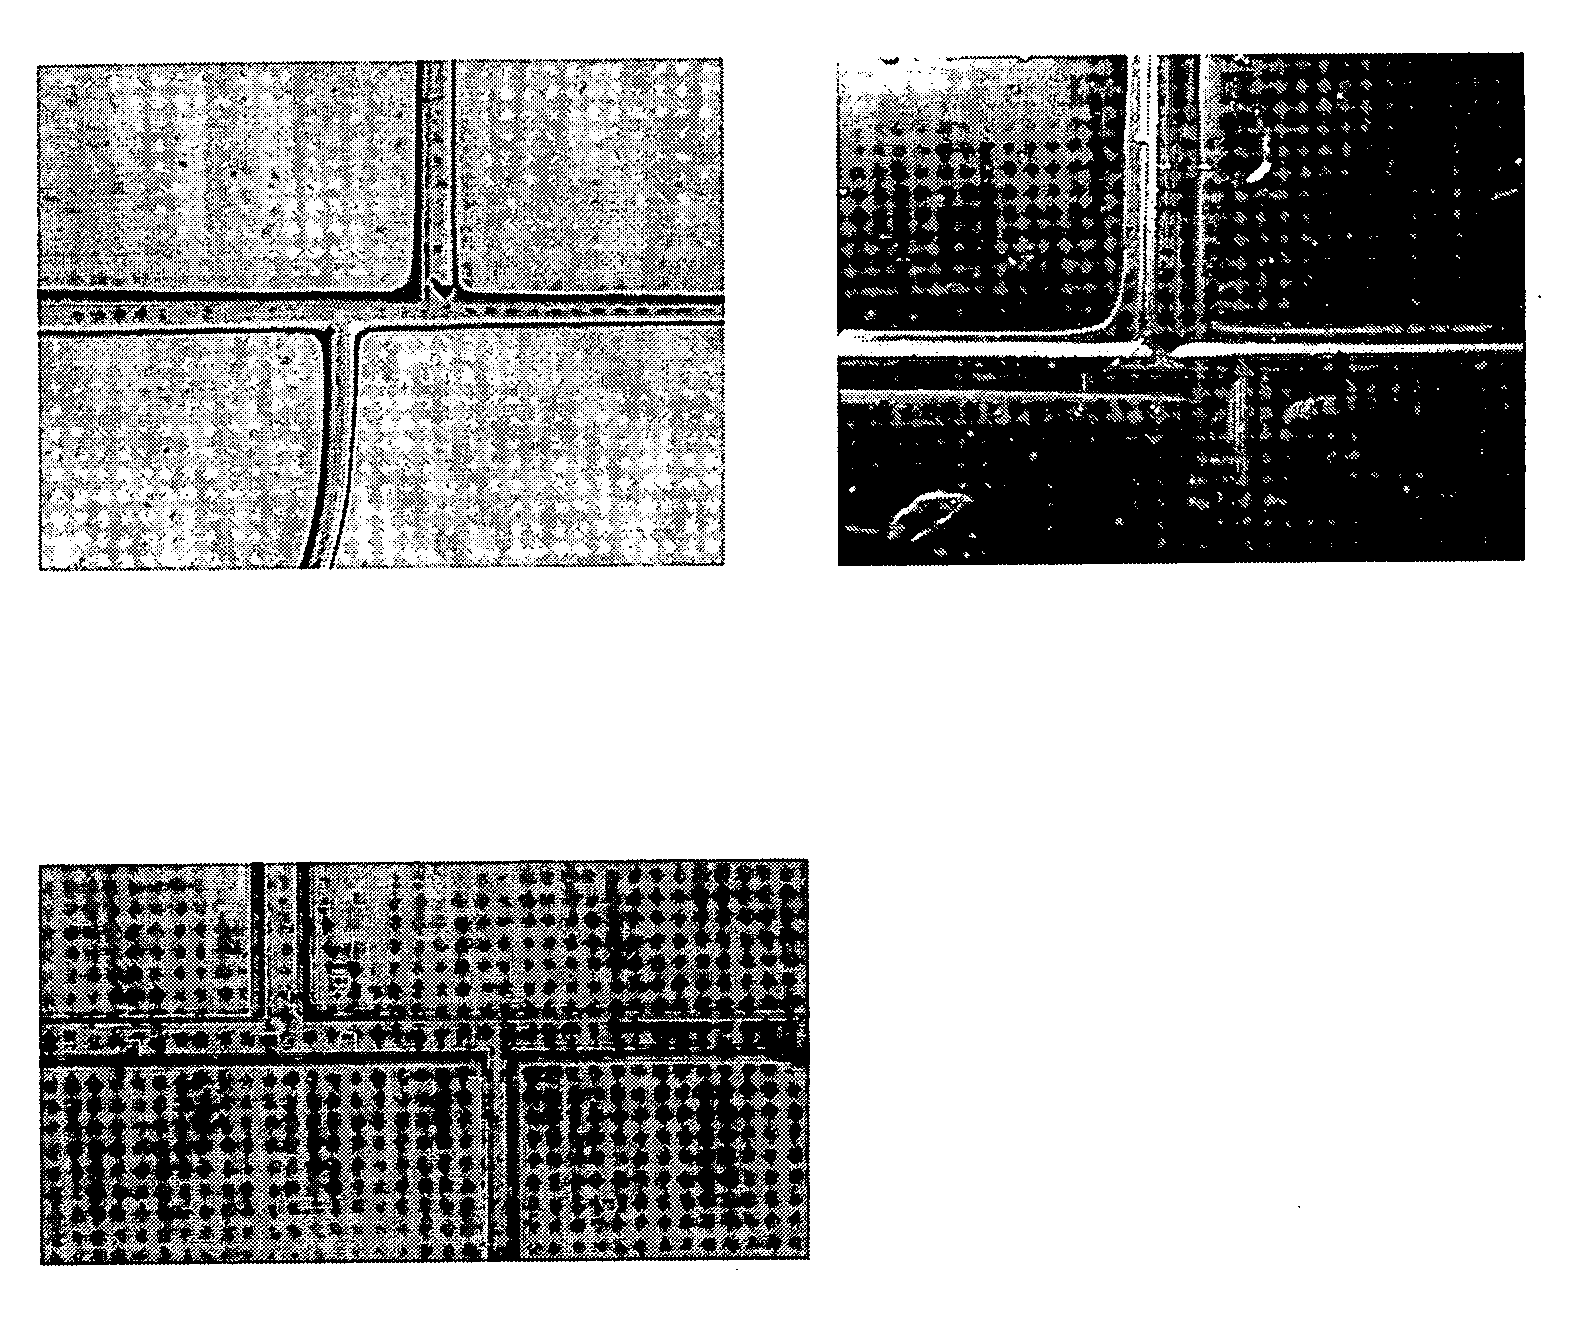 Method for improving the bonding properties of microstructured substrates, and devices prepared with this method